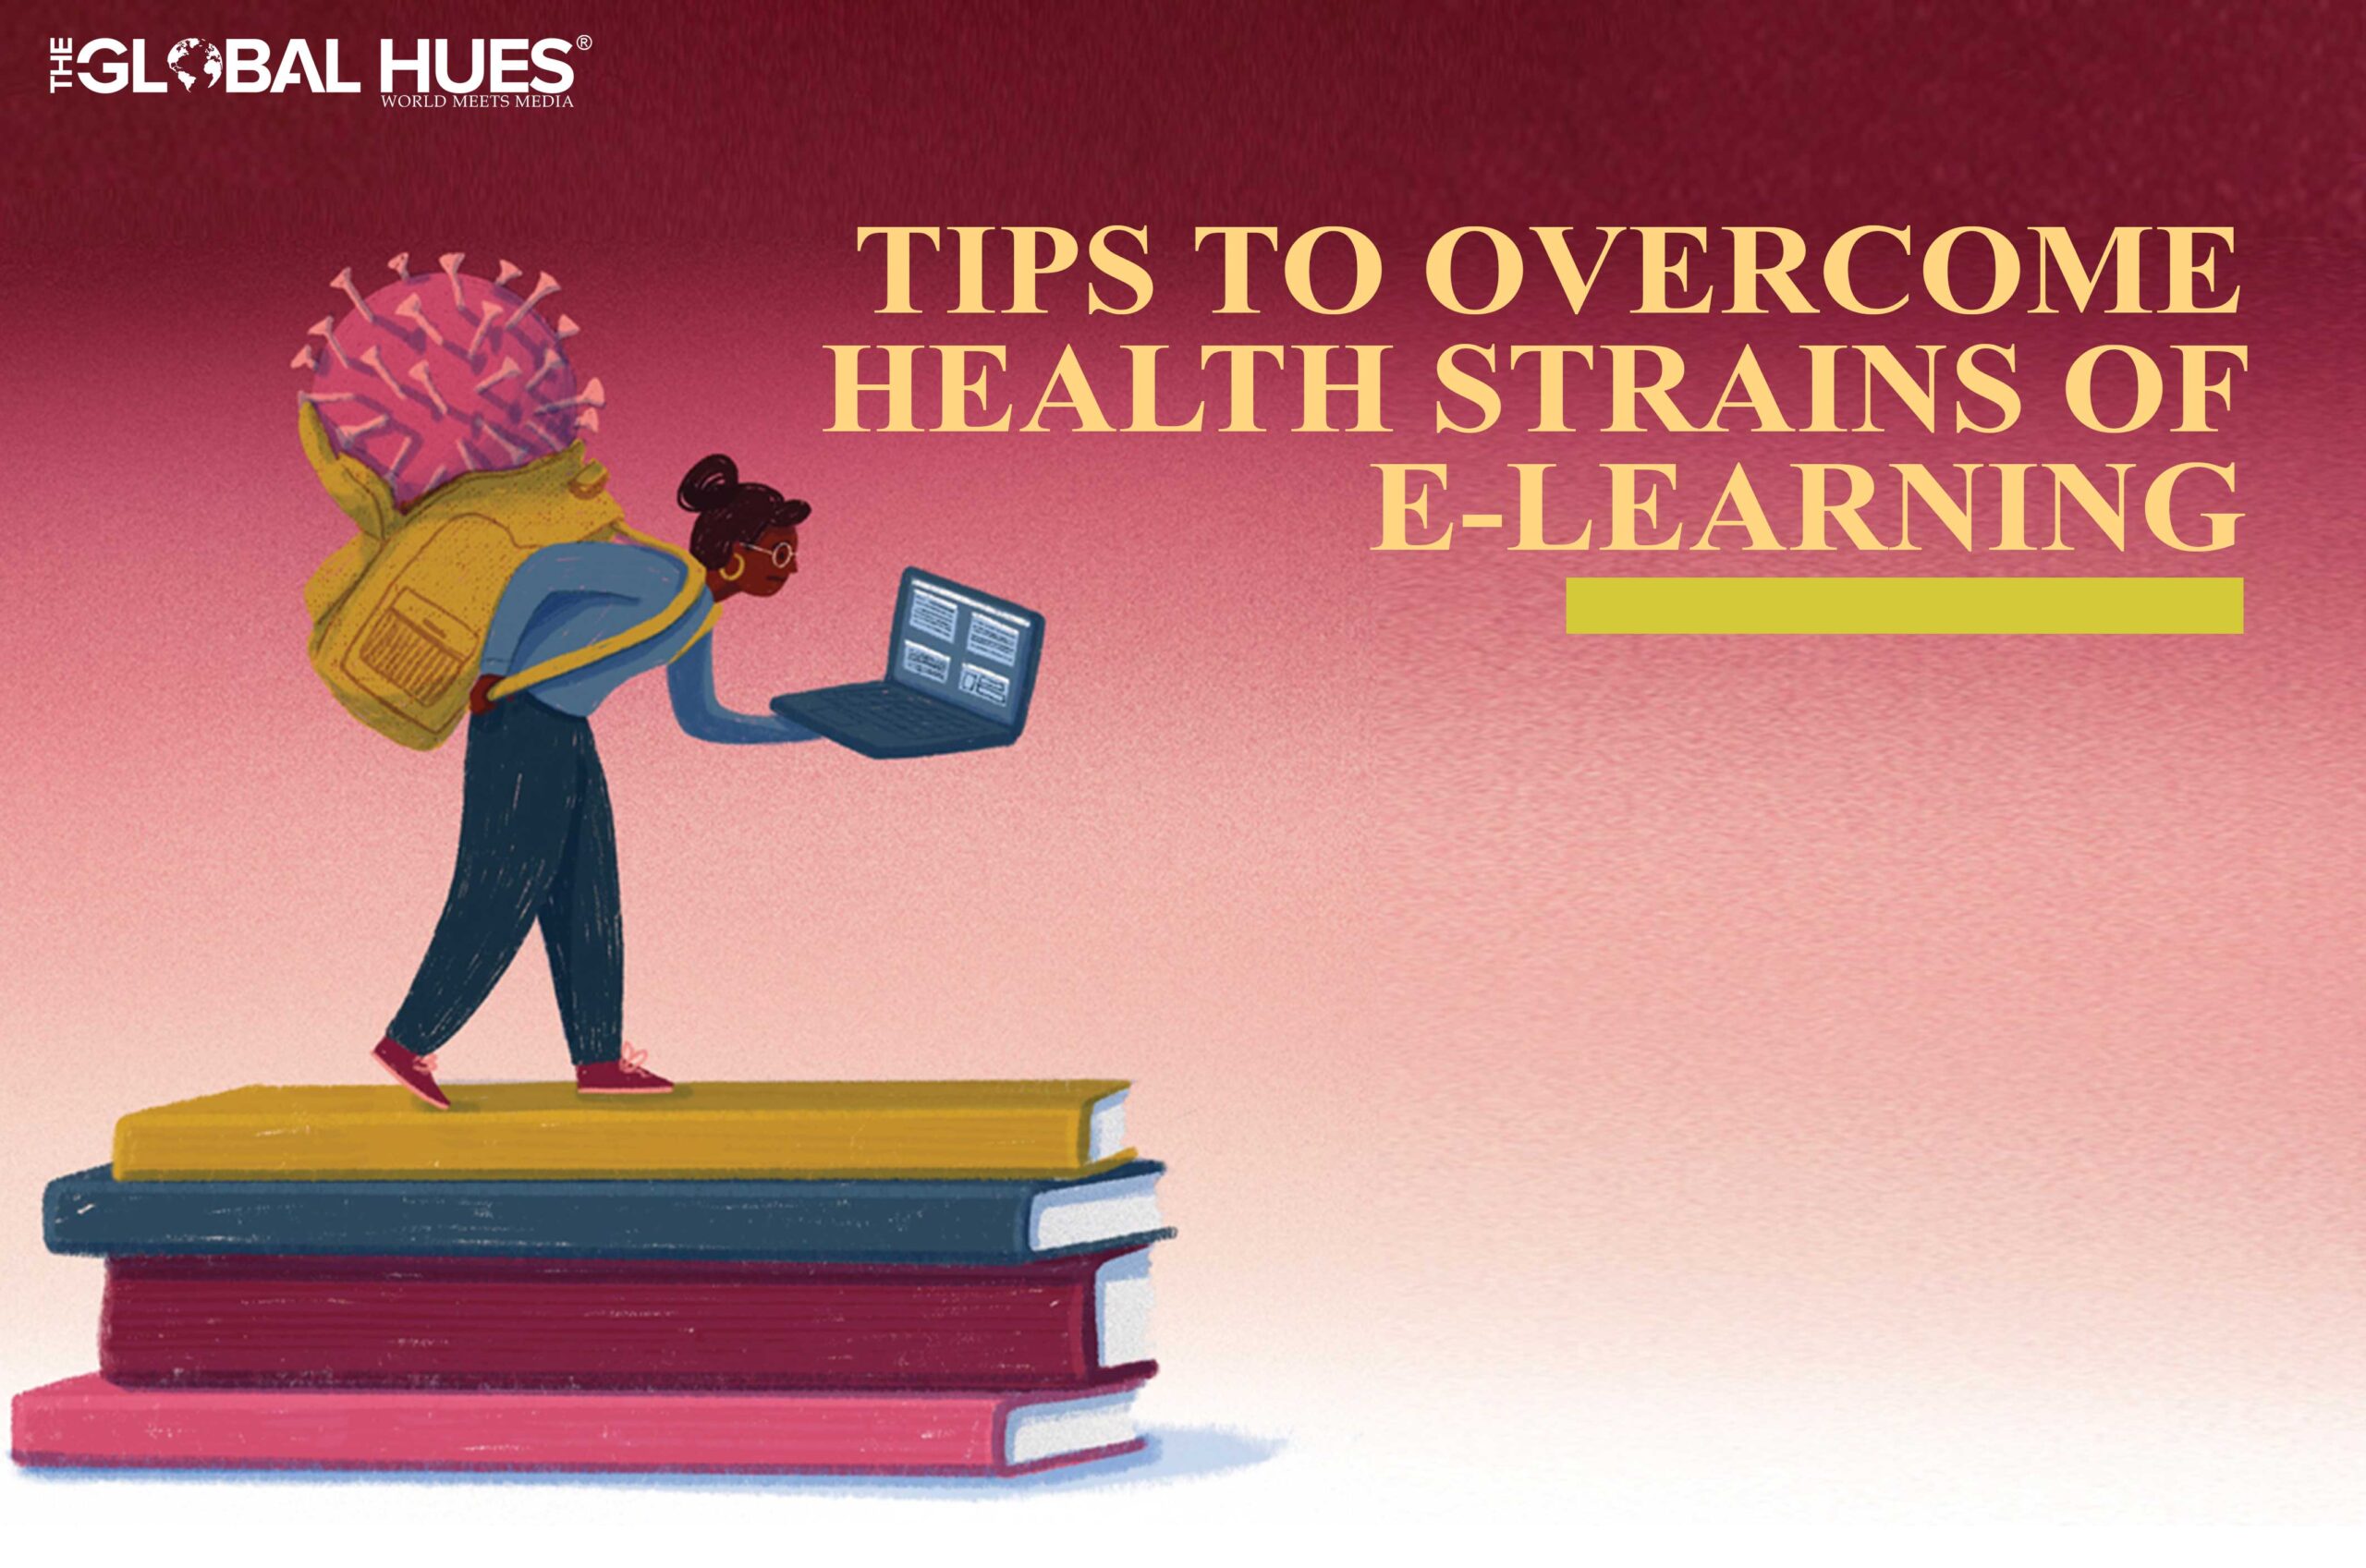 Tips to Overcome health strains of e-learning